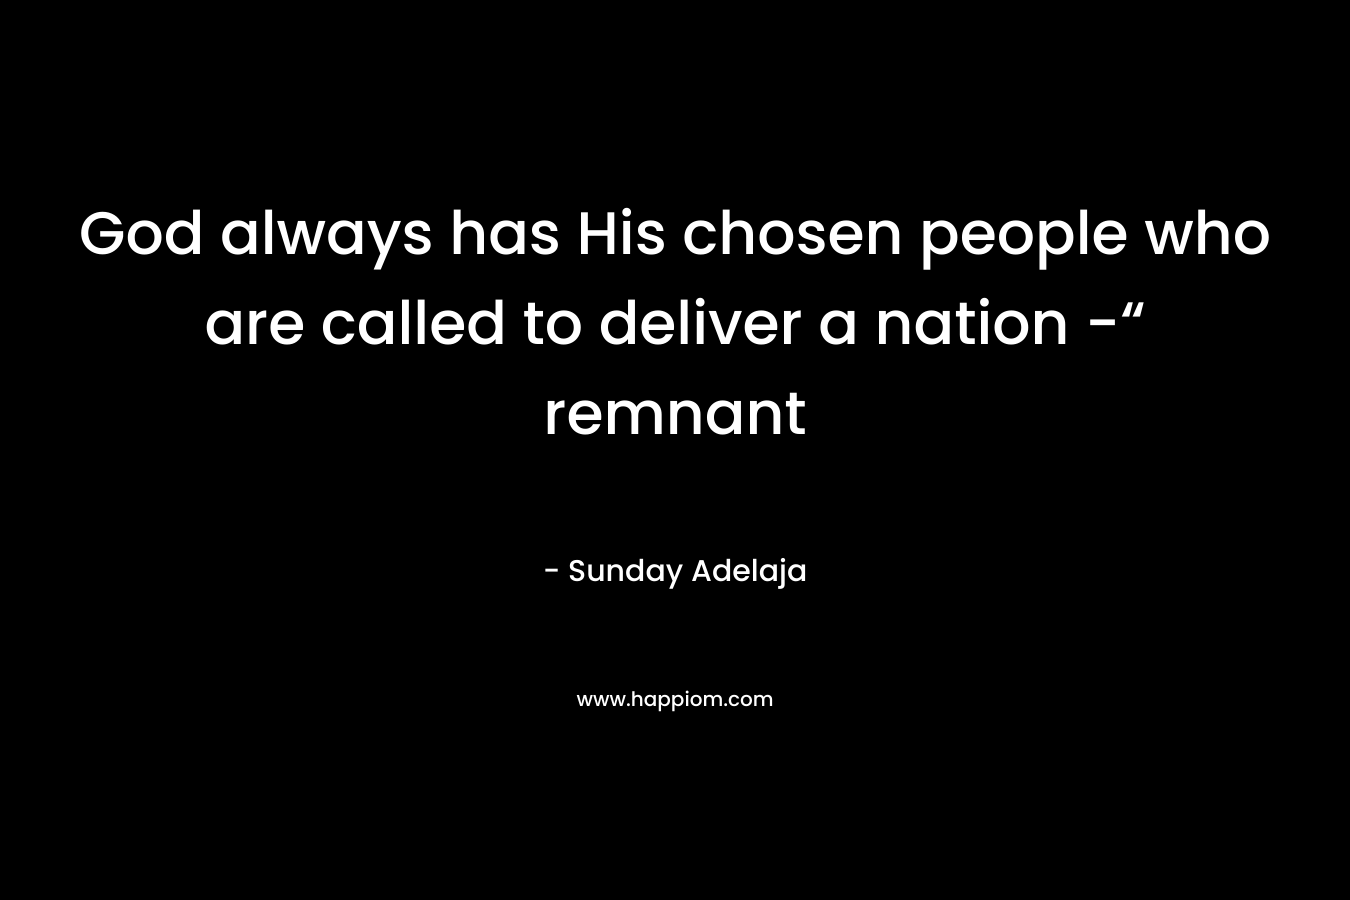 God always has His chosen people who are called to deliver a nation -“ remnant